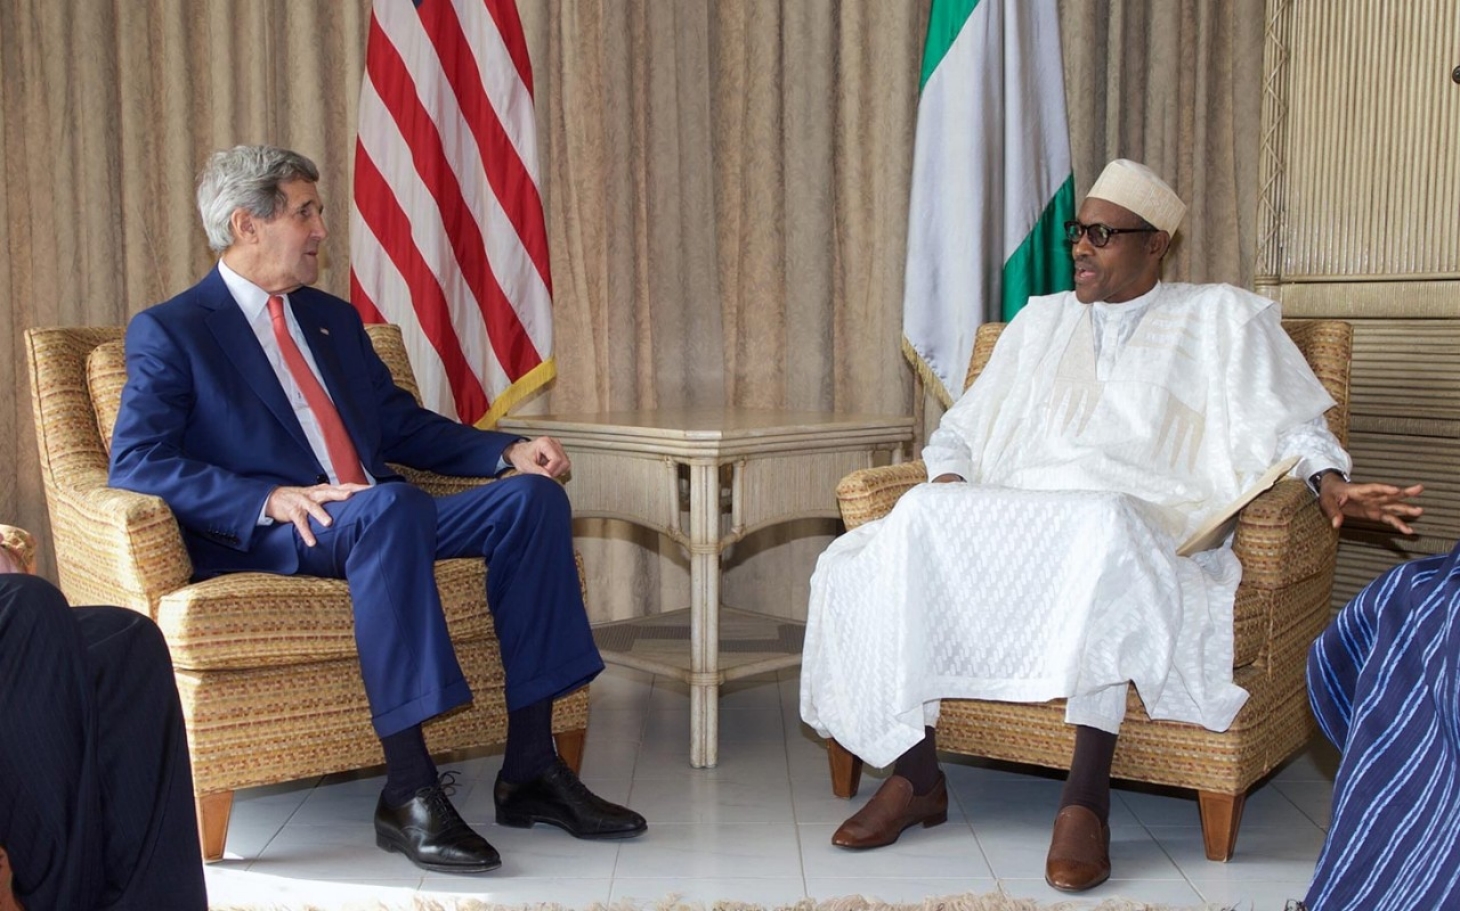 Secretary of States, U.S., John Kerry, and President Muhammadu Buhari. Days after taking office, Nigerian President Muhammadu Buhari also met with President Barack Obama at the White House and o jump-started a frozen bilateral relations.